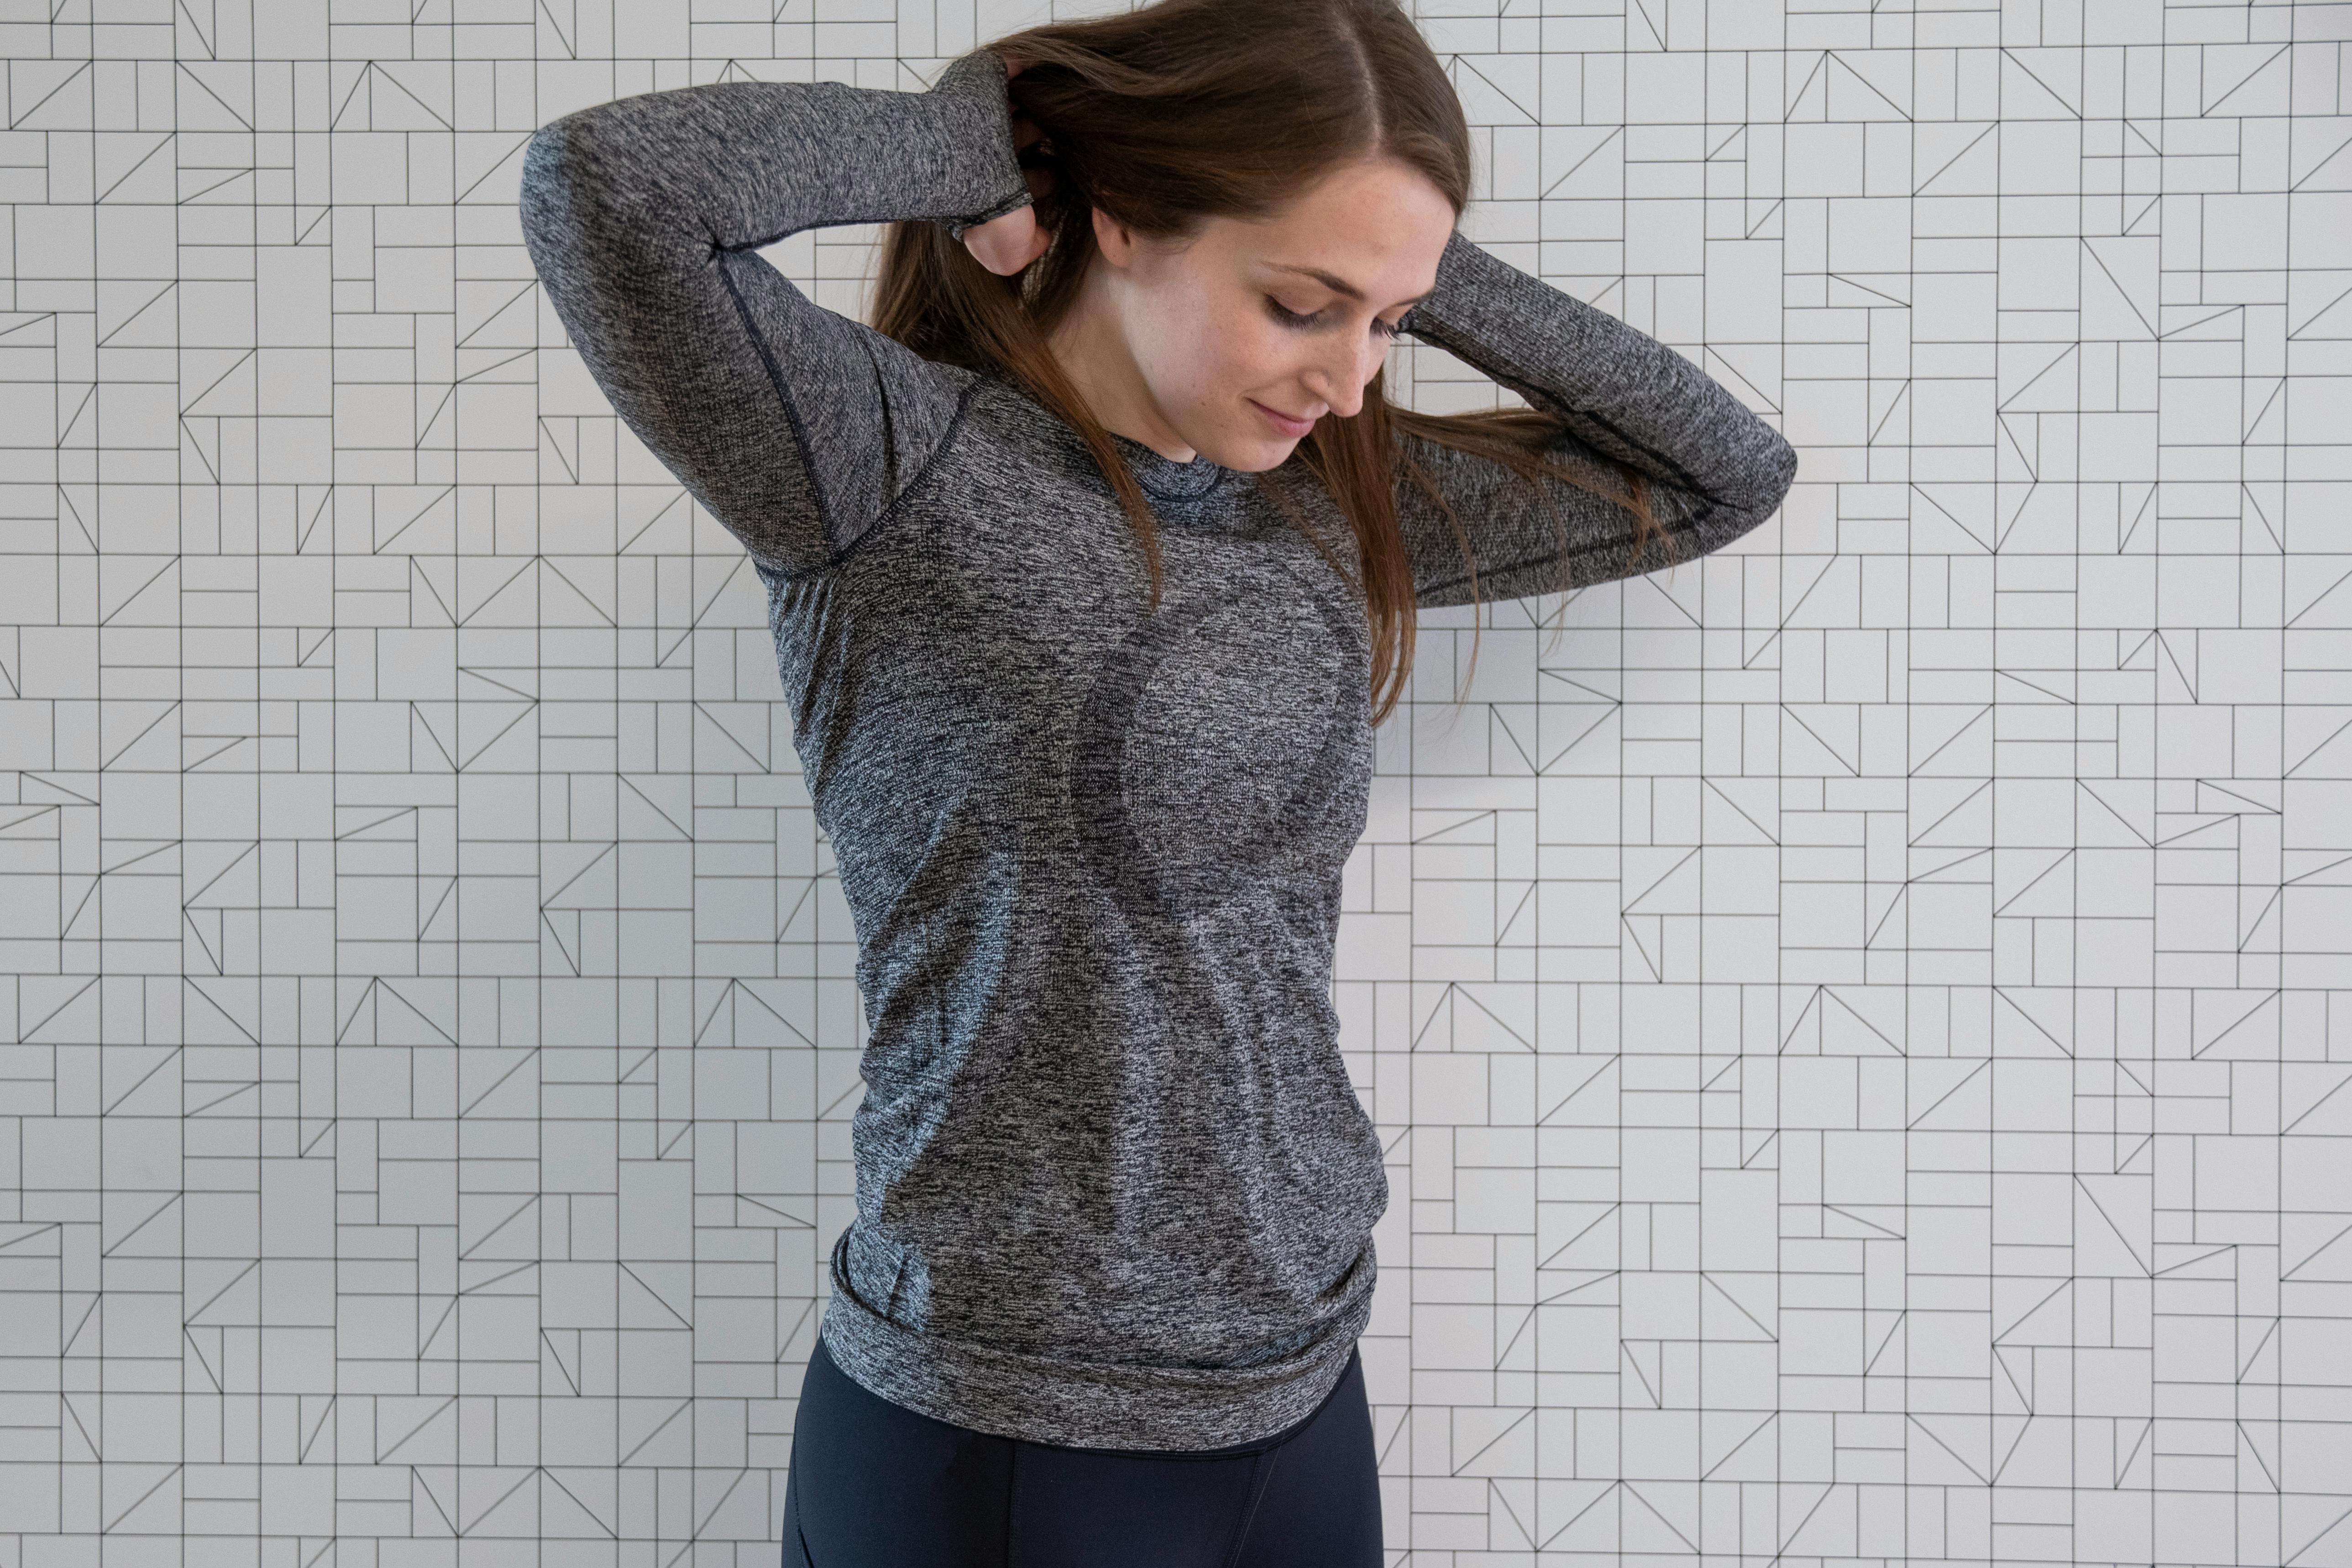 13 Cheap Athleisure Clothes For Under $30 - The Krazy Coupon Lady